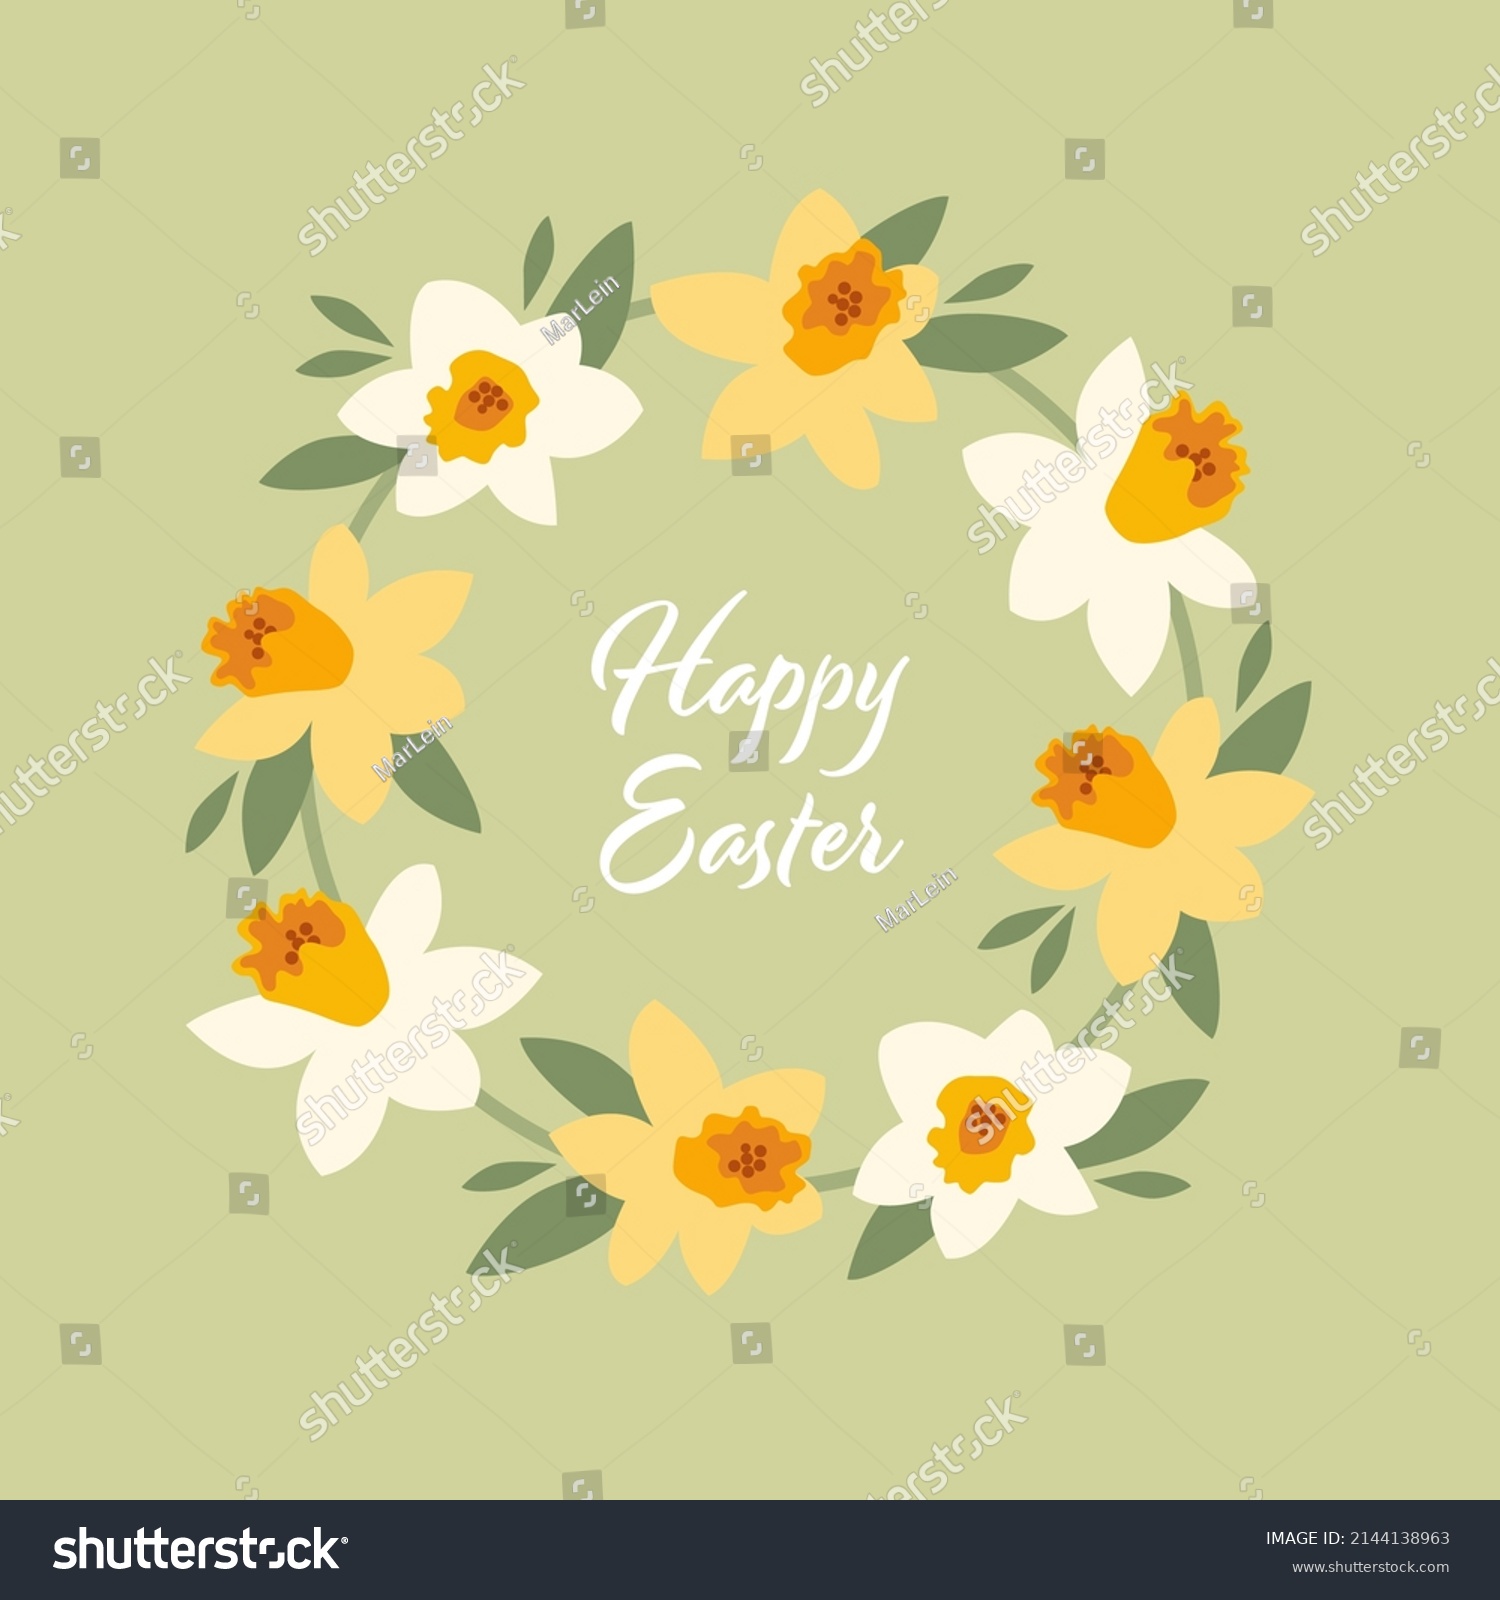 SVG of Daffodil flower wreath. Happy Easter greeting card. svg